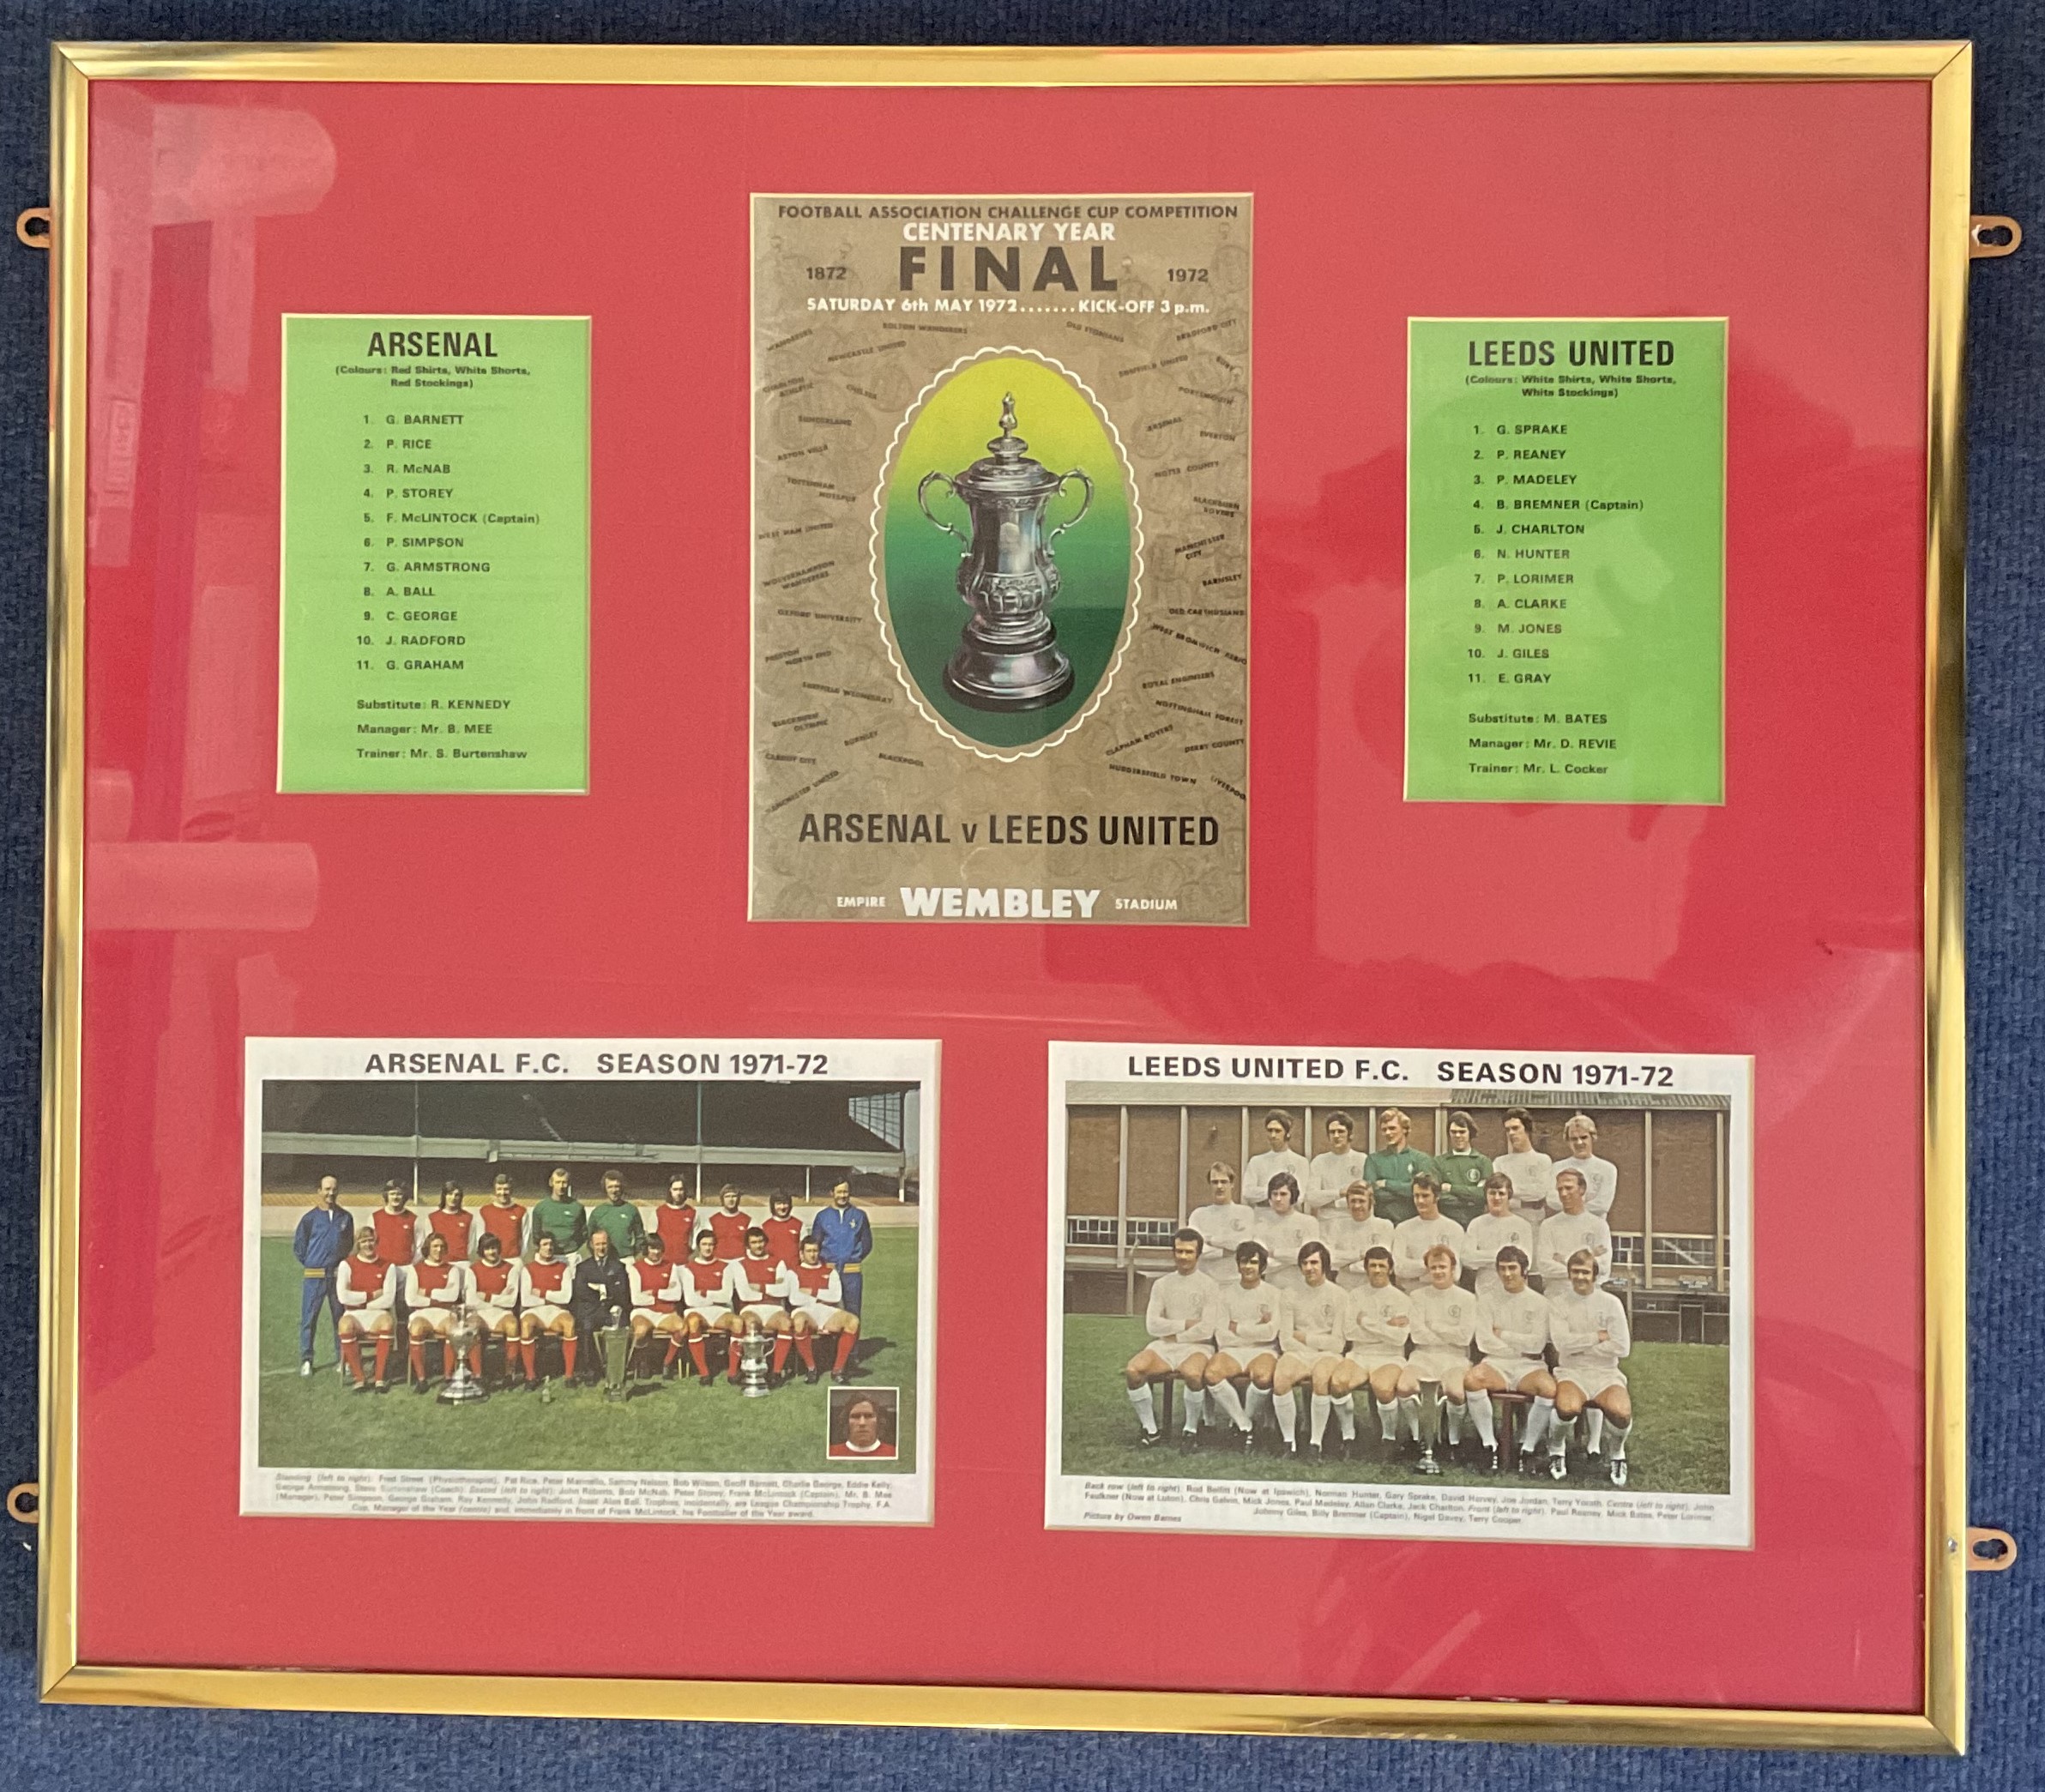 Arsenal v Leeds United 1972 FA Cup Centenary Final 22x24 mounted and framed display includes two